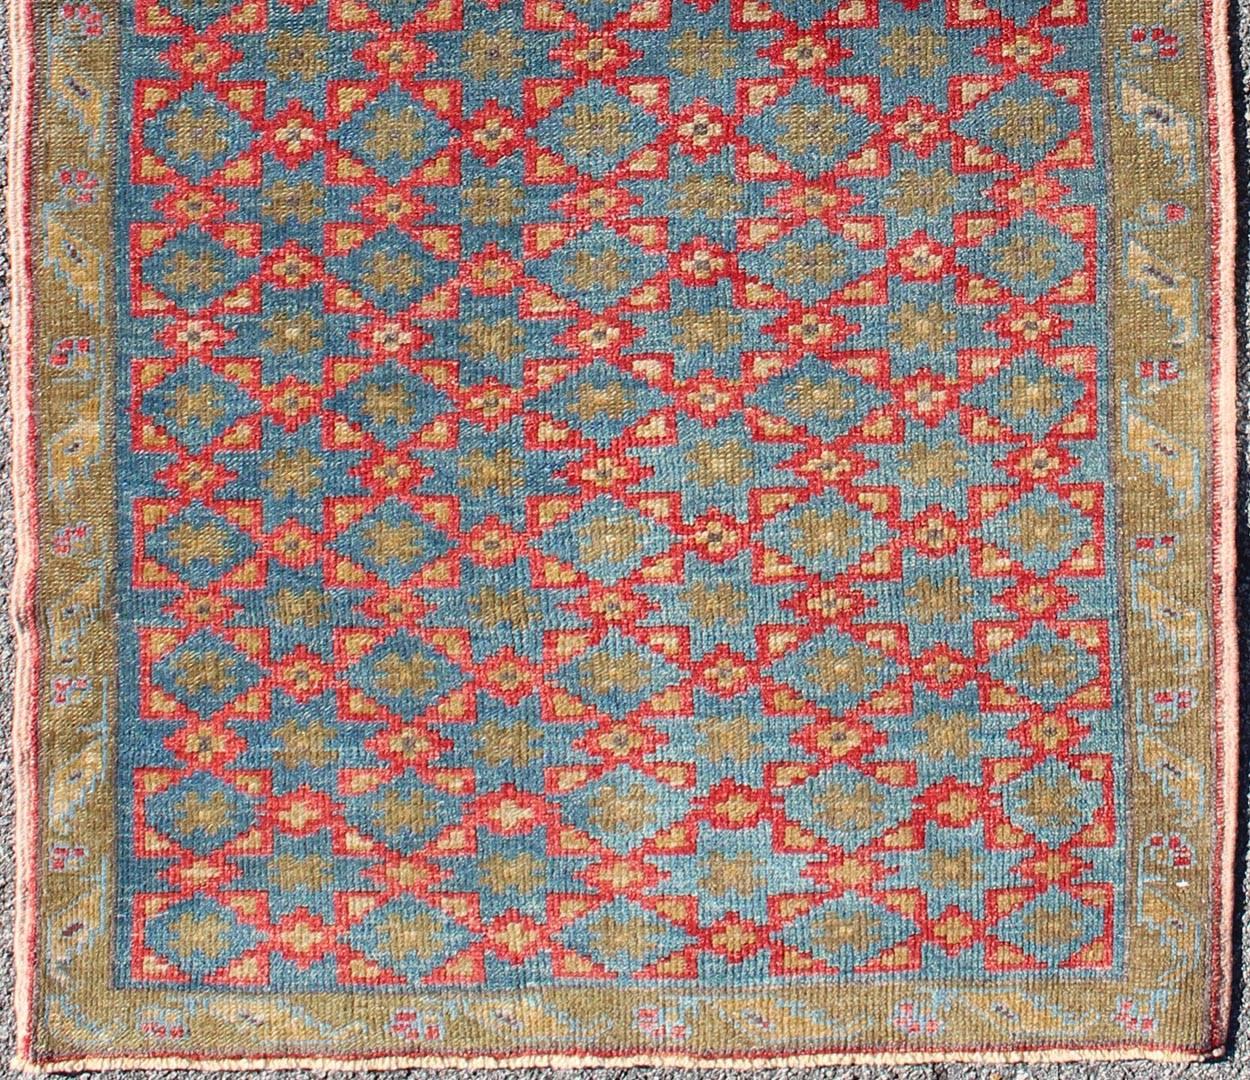 Turkish Konya rug with all-over floral Lattice design in red, blue, olive green, rug dur-3418, country of origin / type: Turkey / Oushak, circa mid-20th century.

Measures: 3'4 x 6'10

The design of this beautiful vintage Konya rug from mid-20th